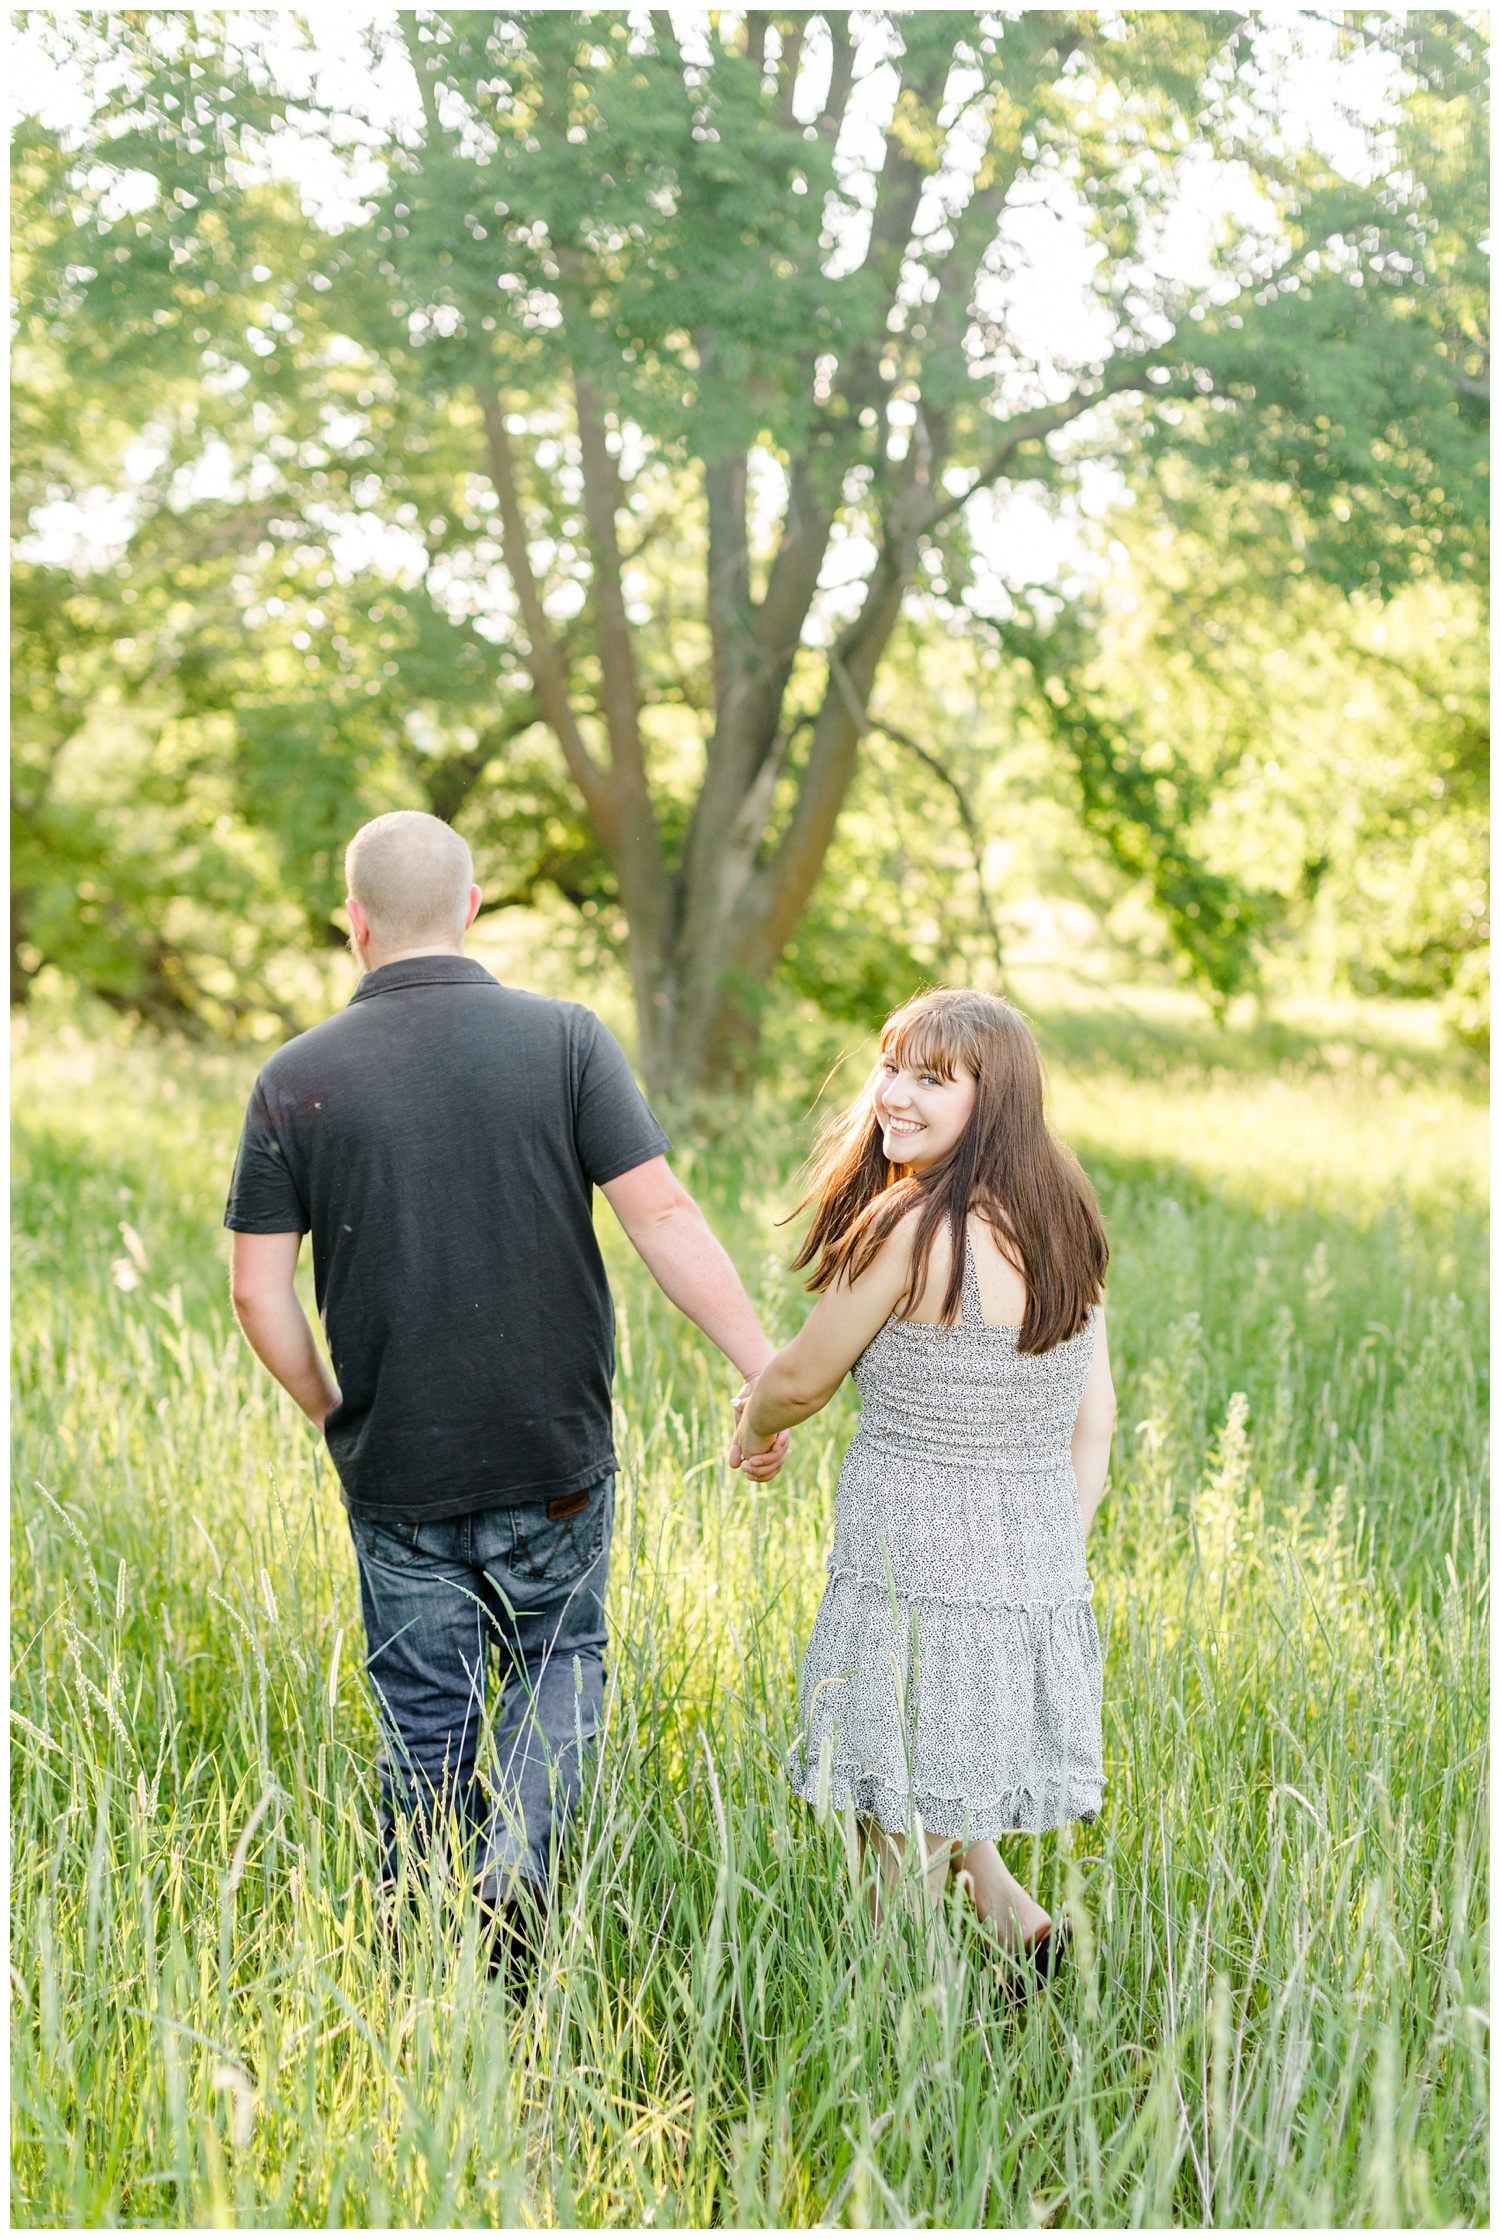 Madeline smiles back as she and Jeremiah walk away in a grassy pasture in Iowa | CB Studio